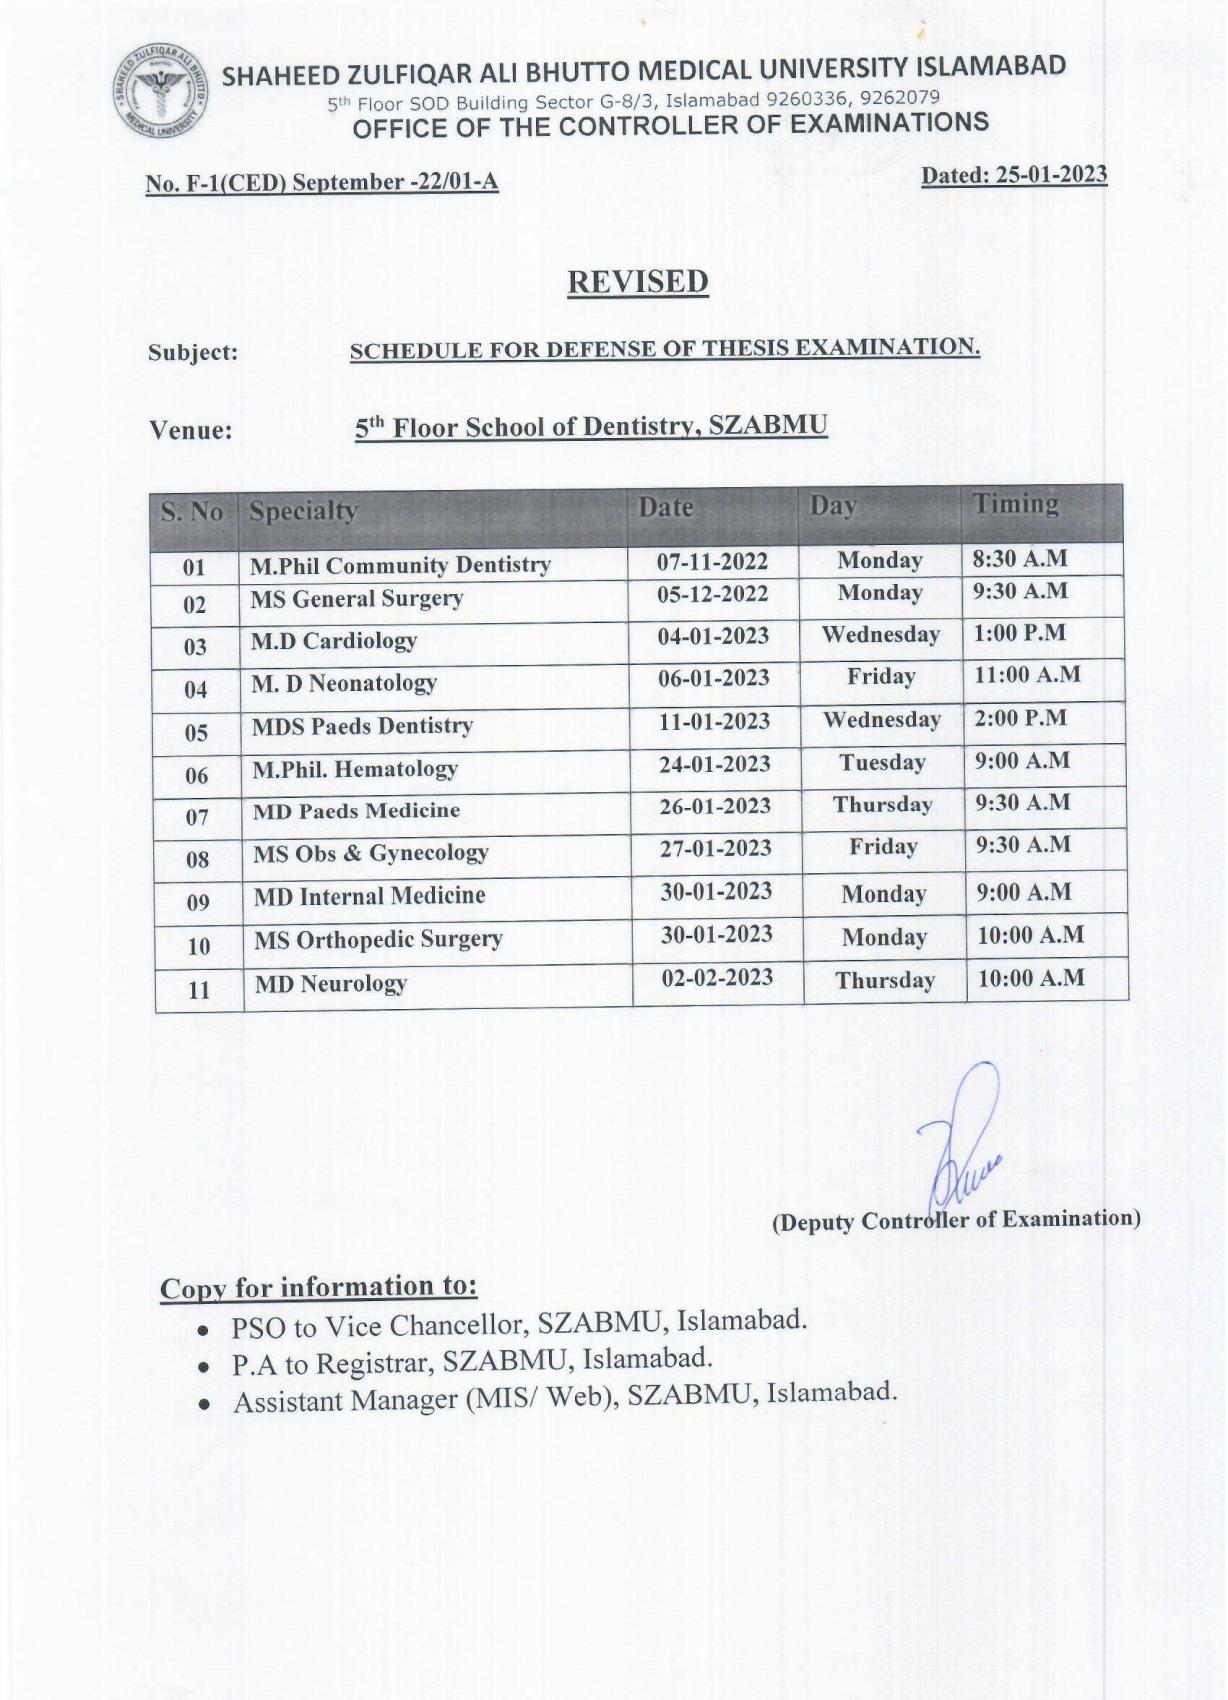 Revised - Schedule for Defense of Thesis Examinations